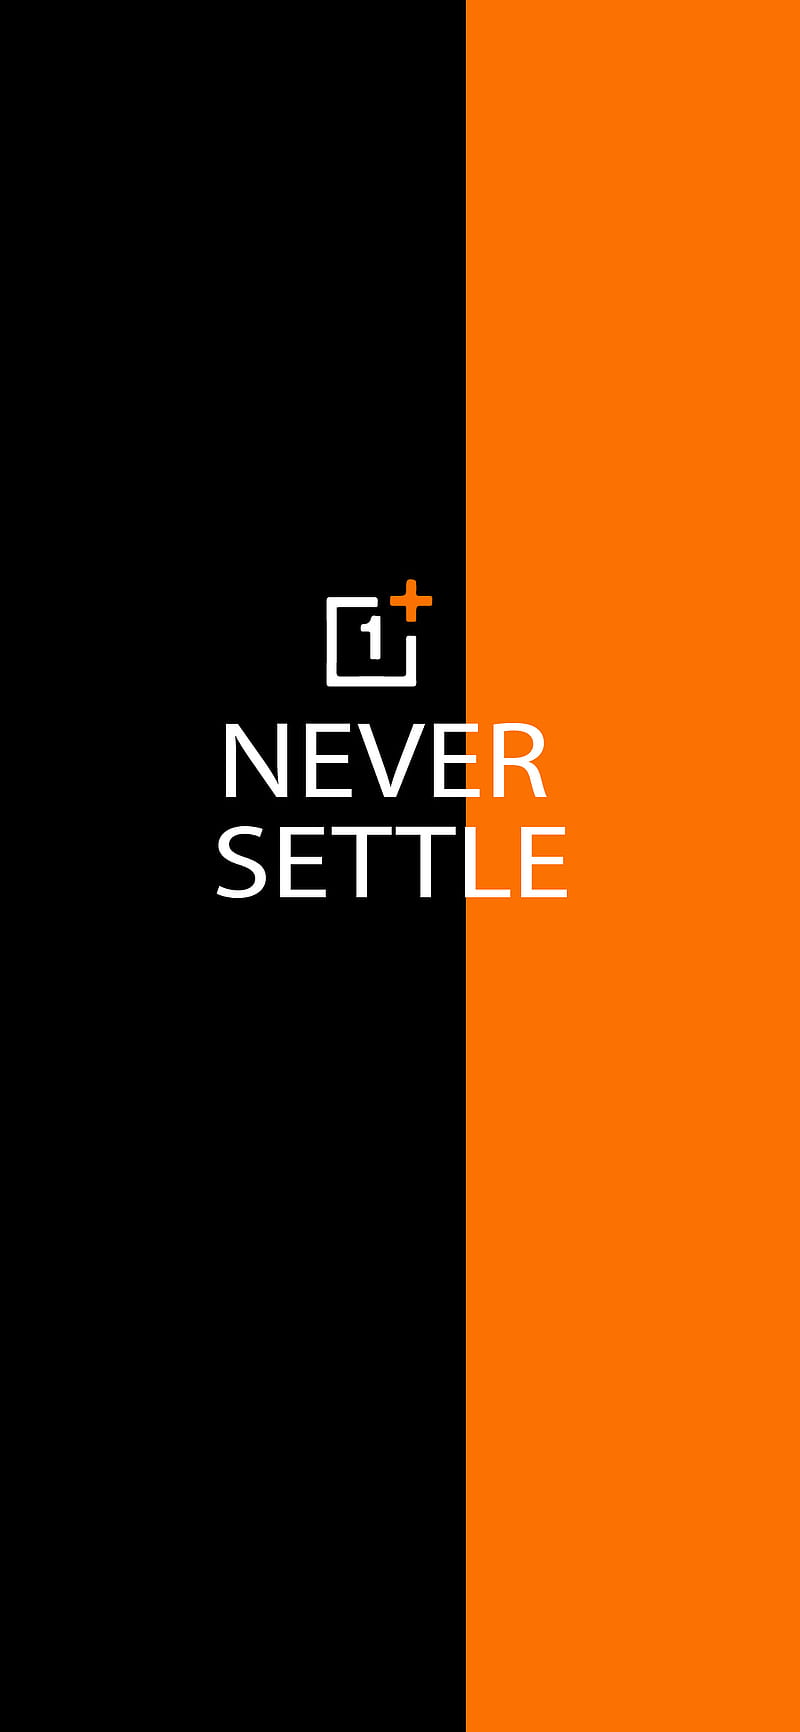 OnePlus Never Settle Wallpaper - Wallpaper from pack 6. #neversettle # wallpaper Follow to get new walls of Never Settle and get Motivated every  single Moment. #oneplus #oneplus3 #oneplusone #oneplus2 #logo #text #quote #